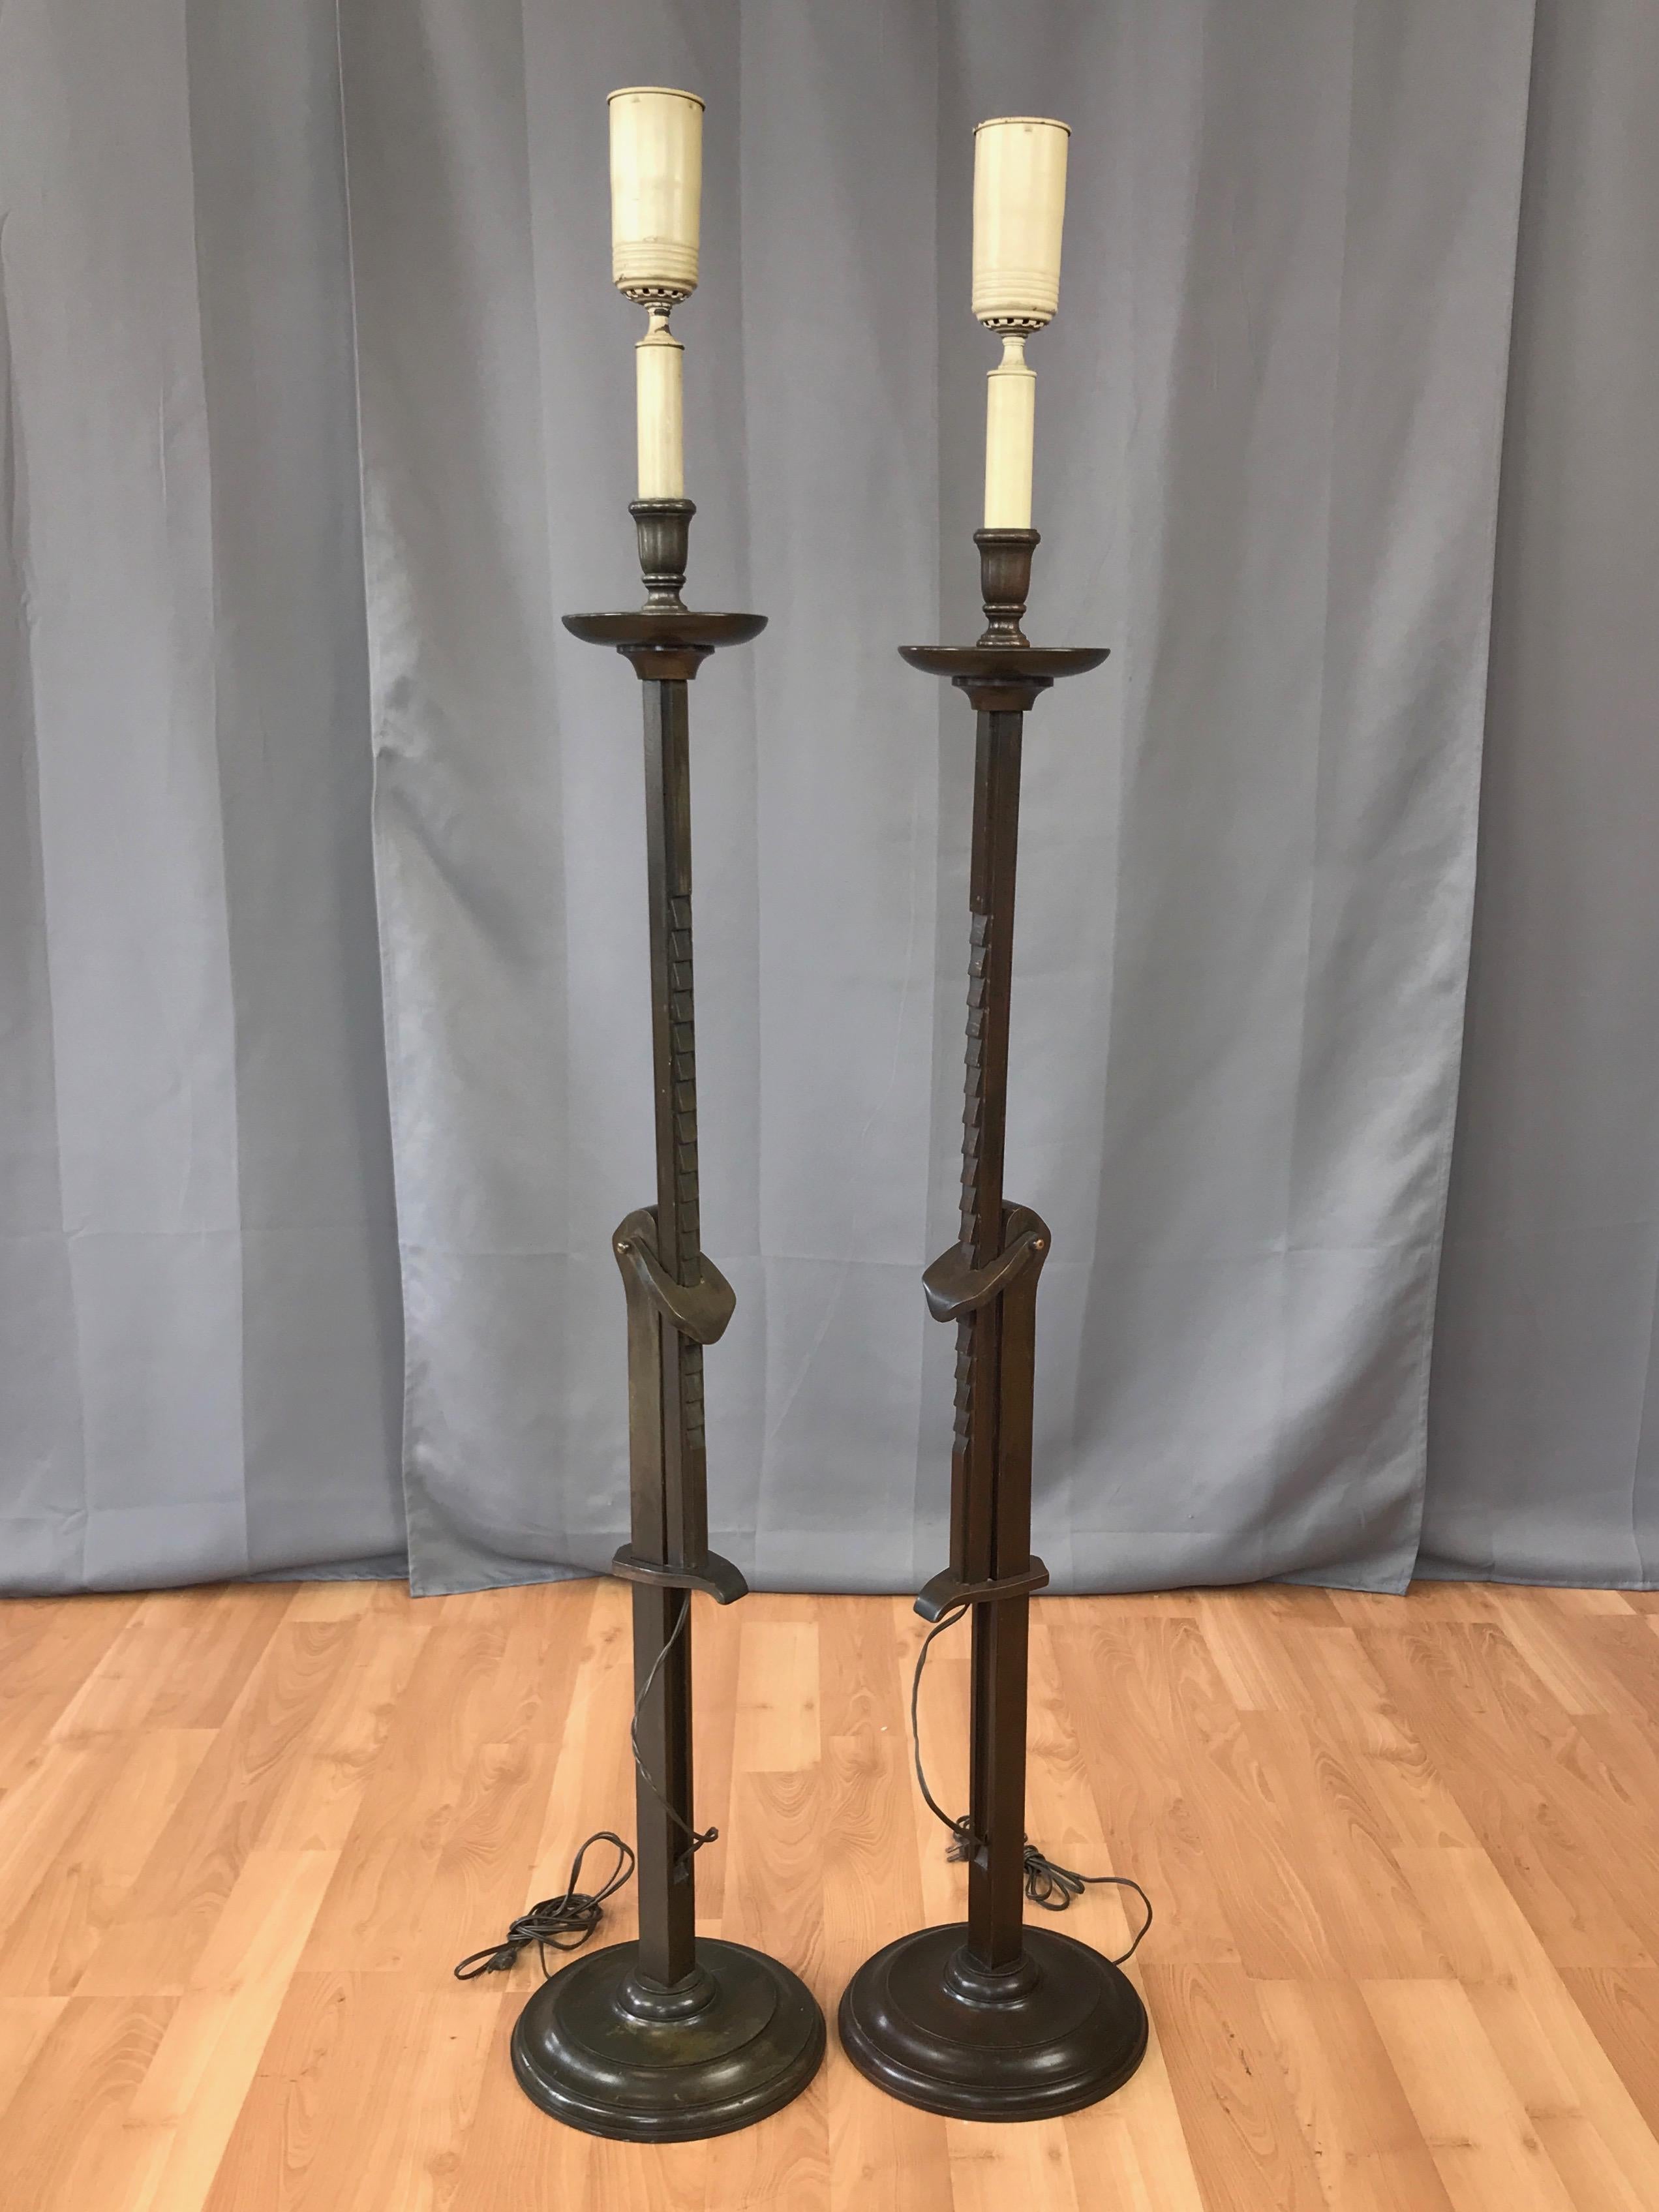 An uncommon pair of early 1940s mahogany candlestick-style adjustable height floor lamps by renowned California designer Frances Adler Elkins (b. 1888–1953).

Clever ratcheted mechanism allows for incremental adjustment from 48.5 to 64 inches